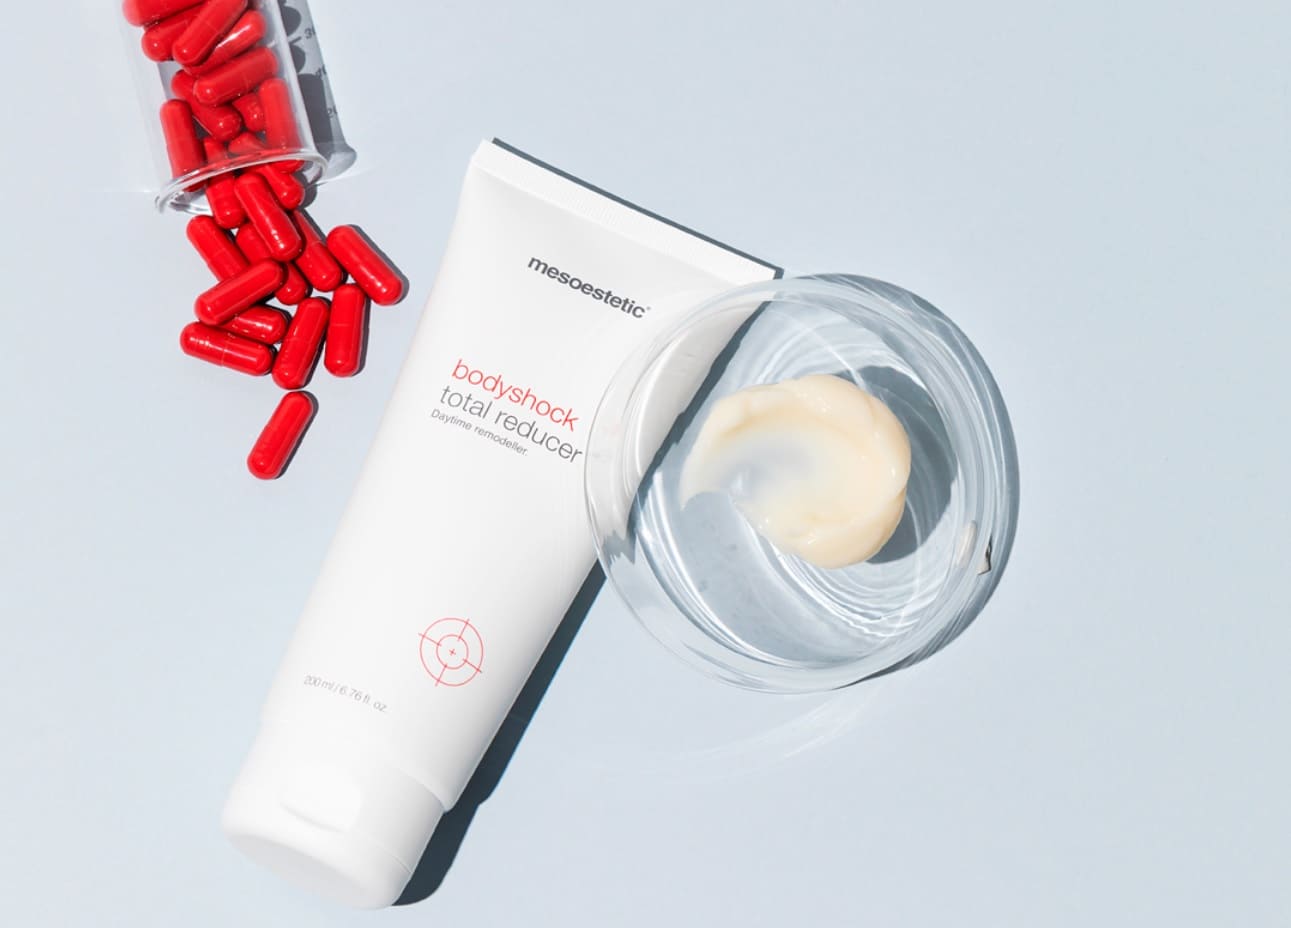 Shake, apply & go to eliminate localised fat with the new bodyshock reduce & go by mesoestetic